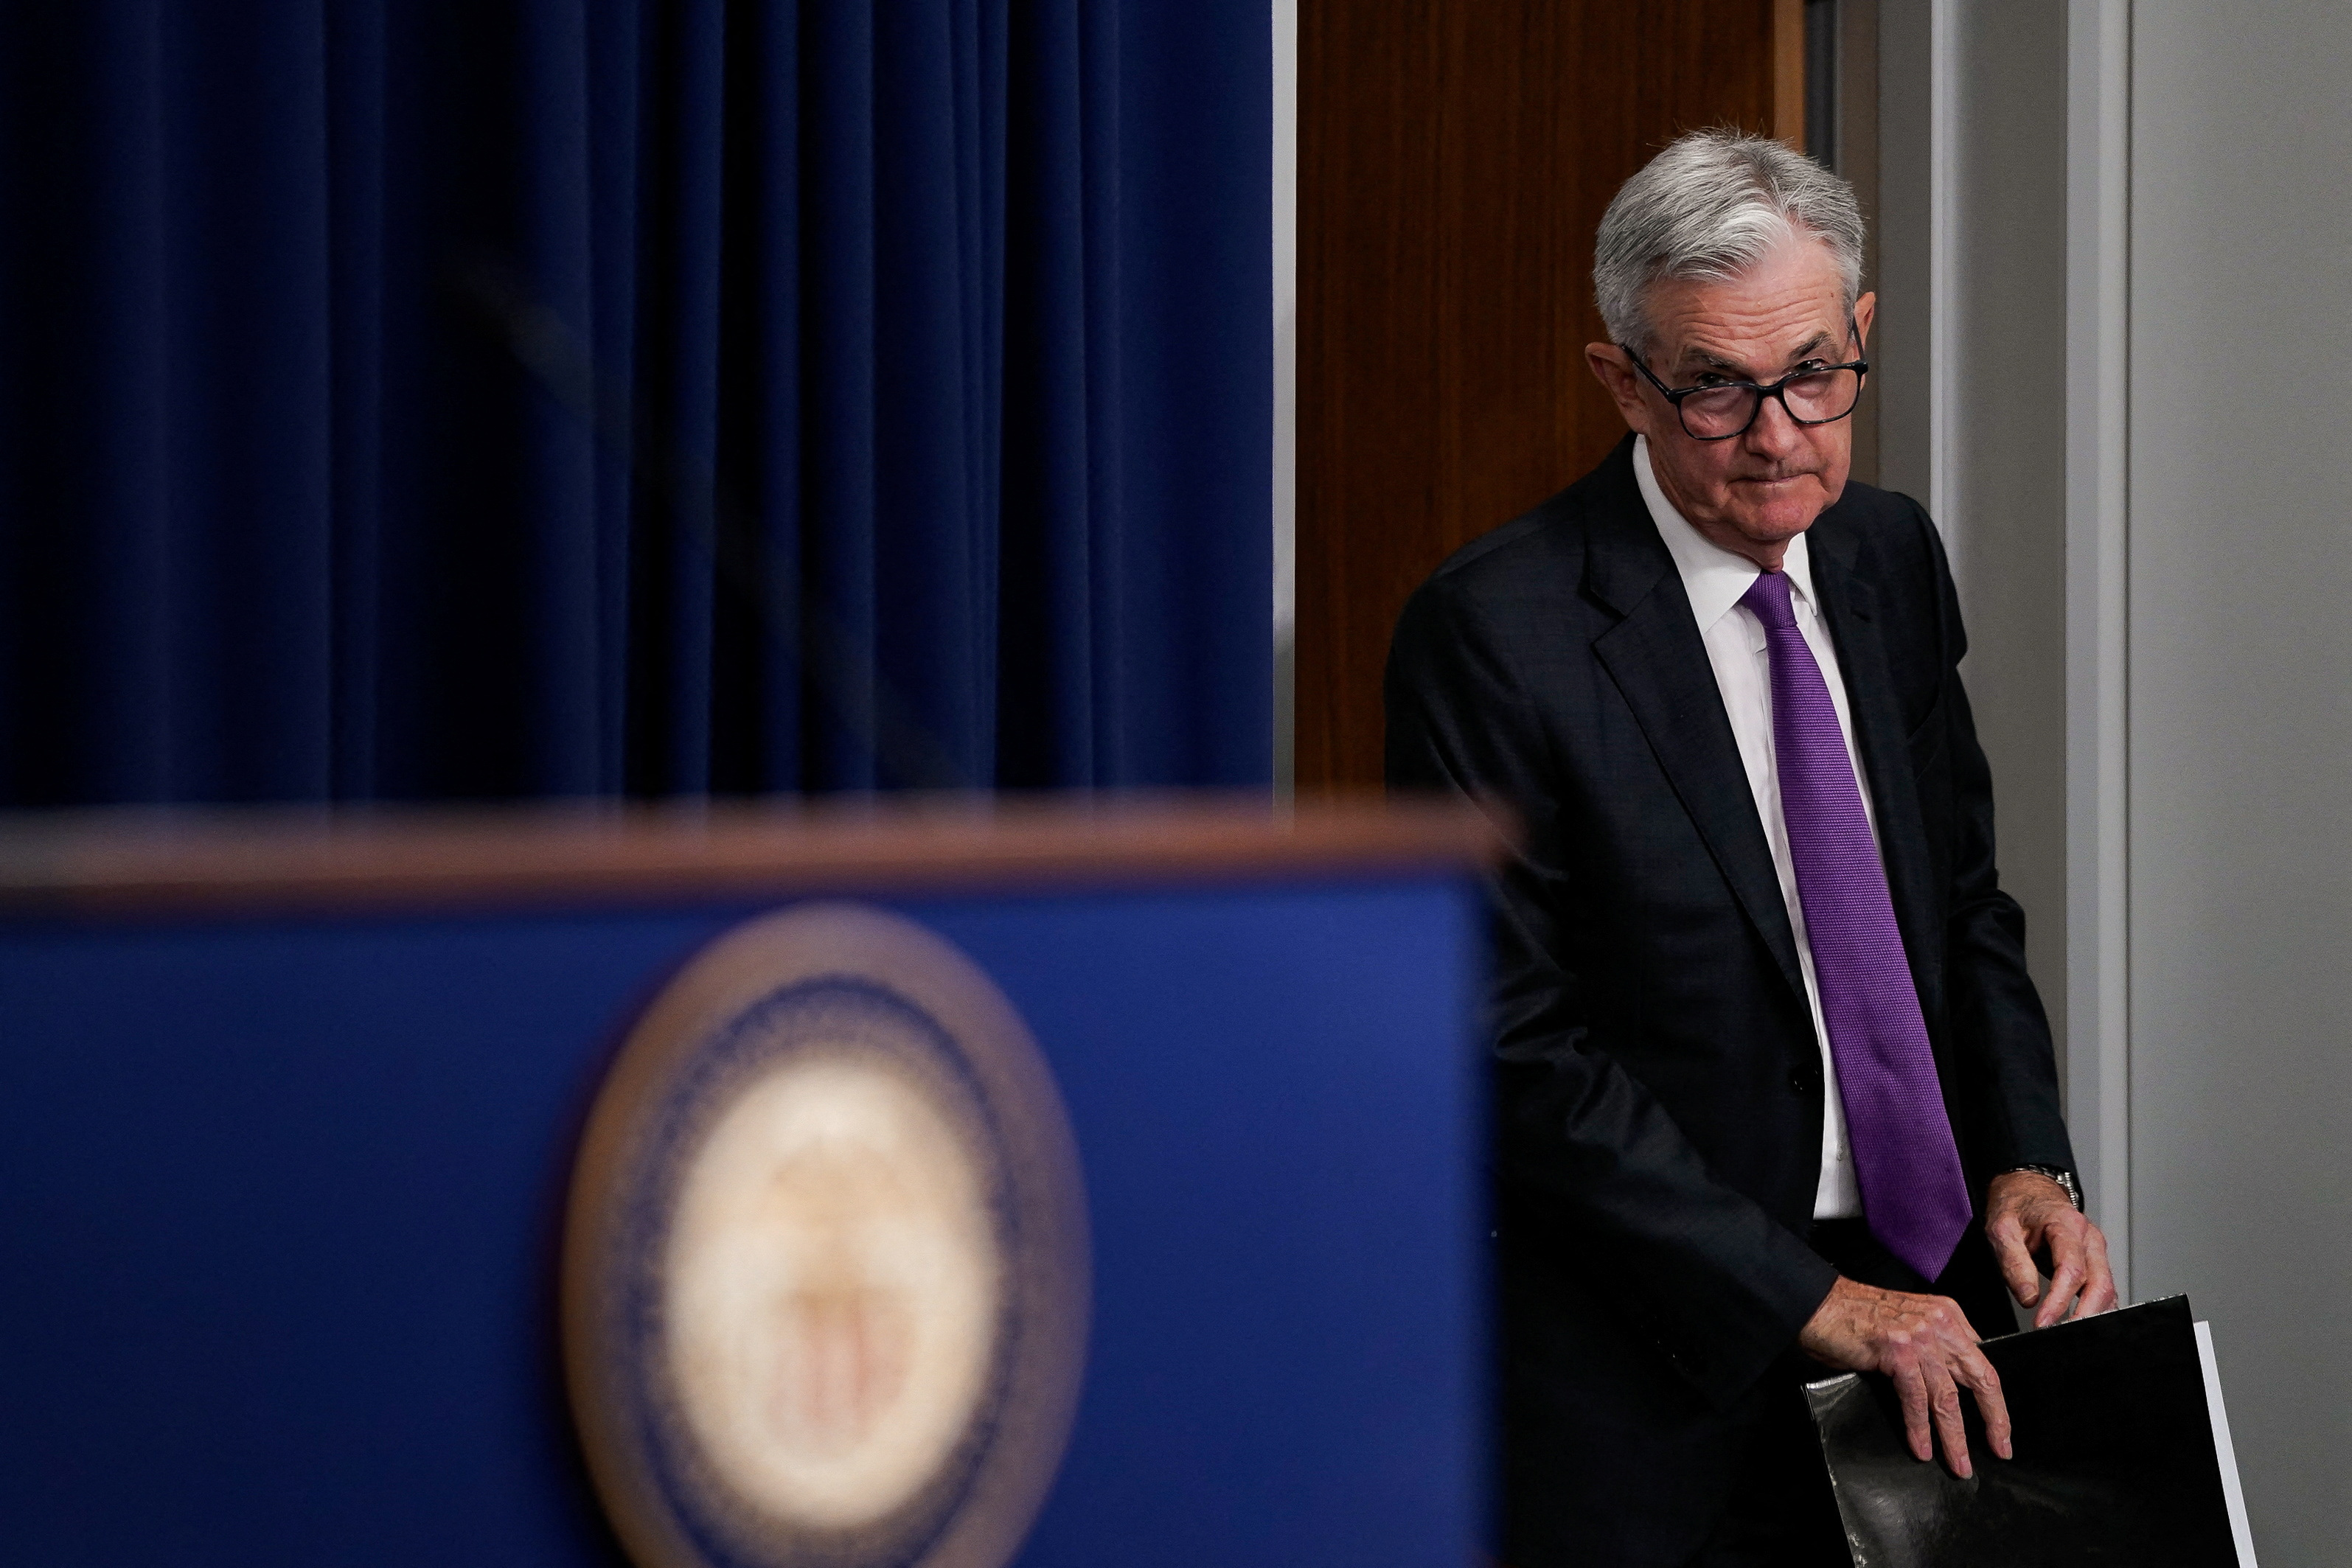 Federal Reserve Board Chairman Jerome Powell attends a press conference in Washington